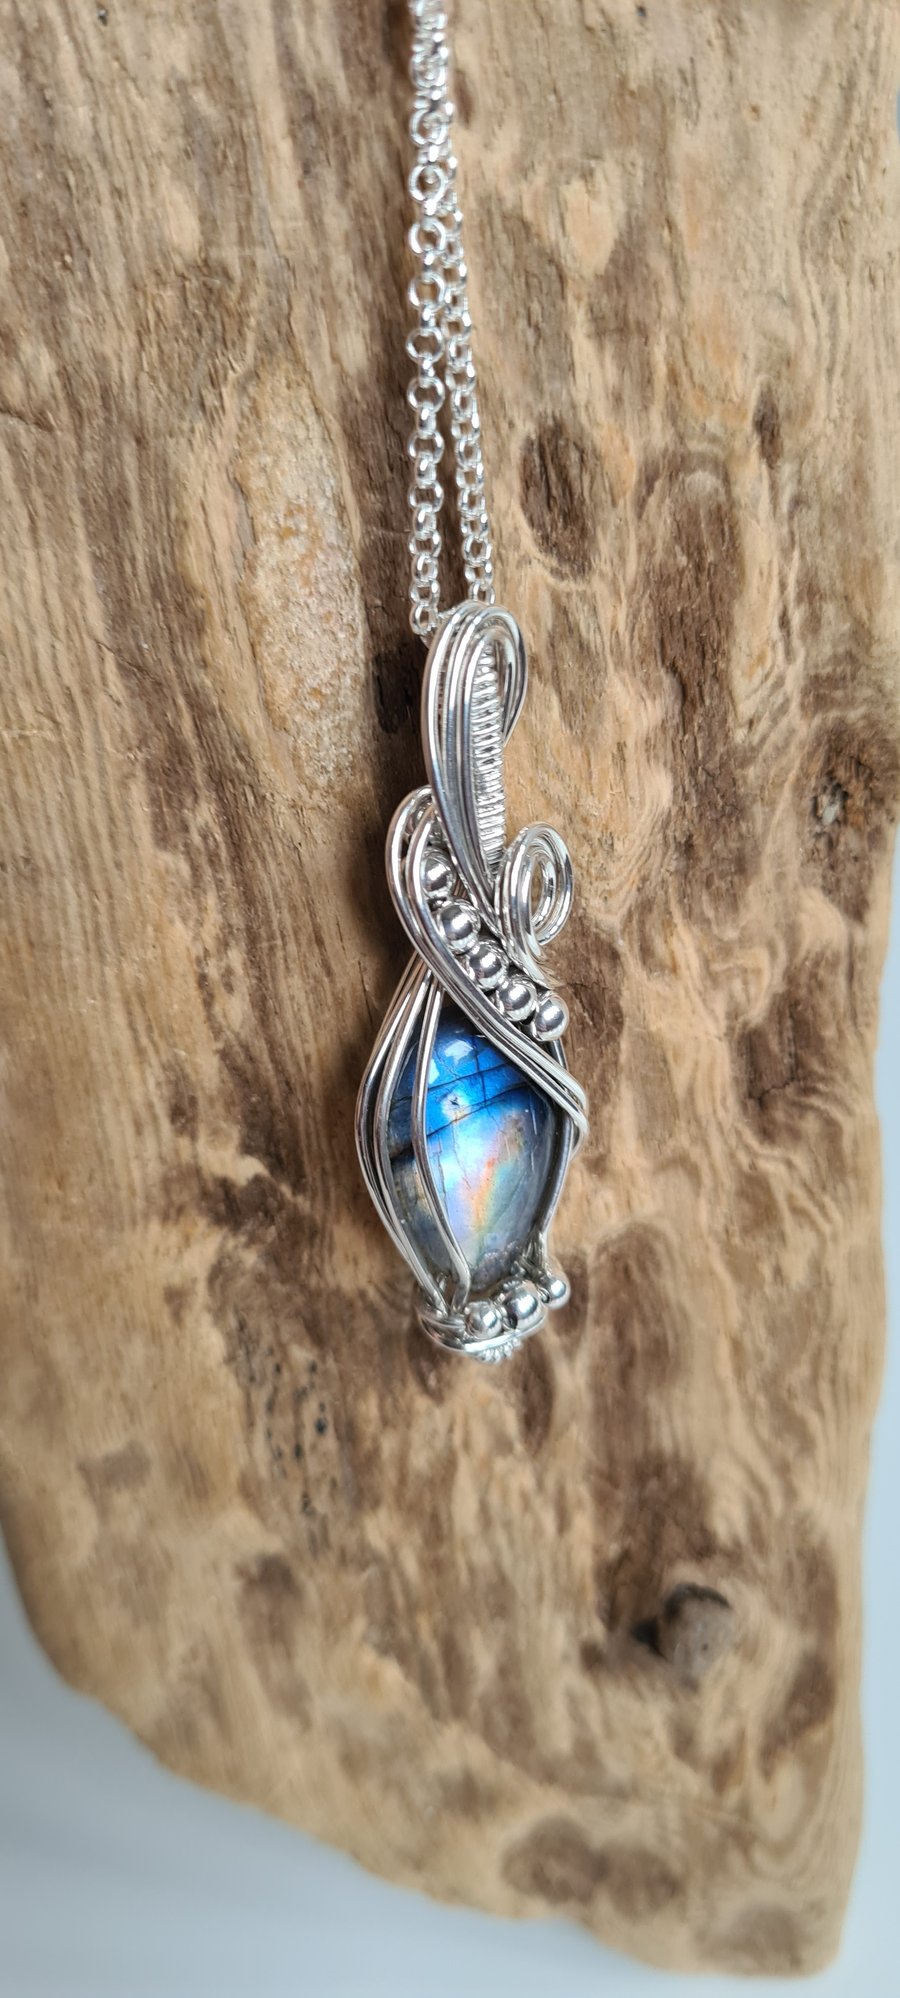 Handmade Natural Labradorite & 925 Silver Necklace Pendant with Chain,Gift Boxed